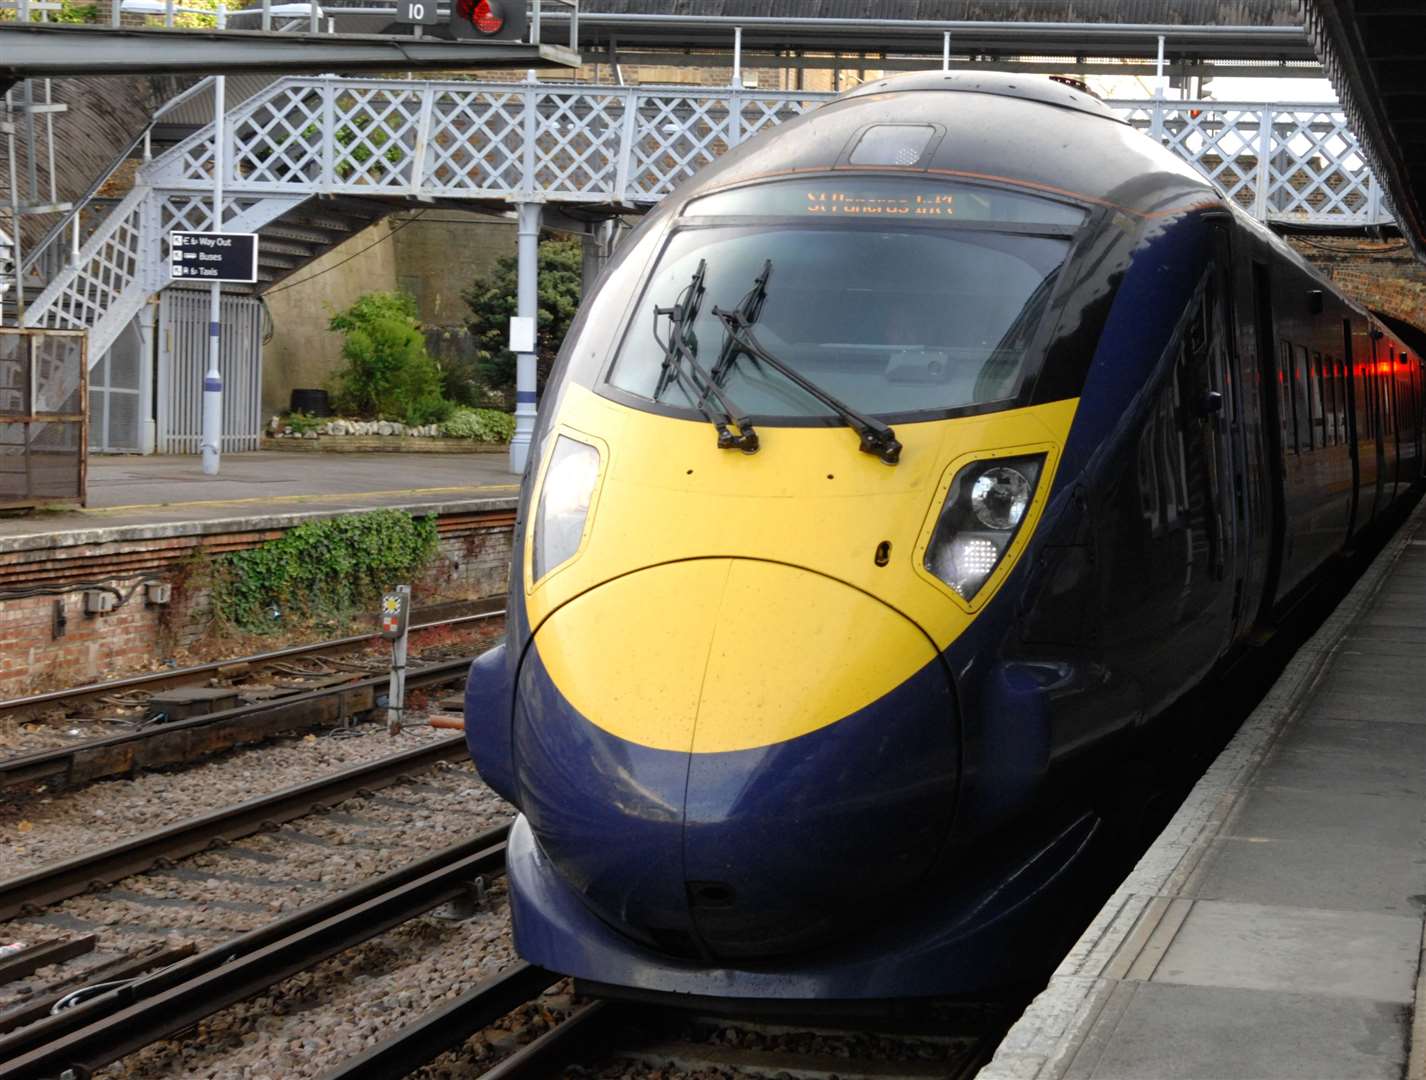 High speed services from Maidstone West could require extra capacity in coming years. Picture: Matthew Walker